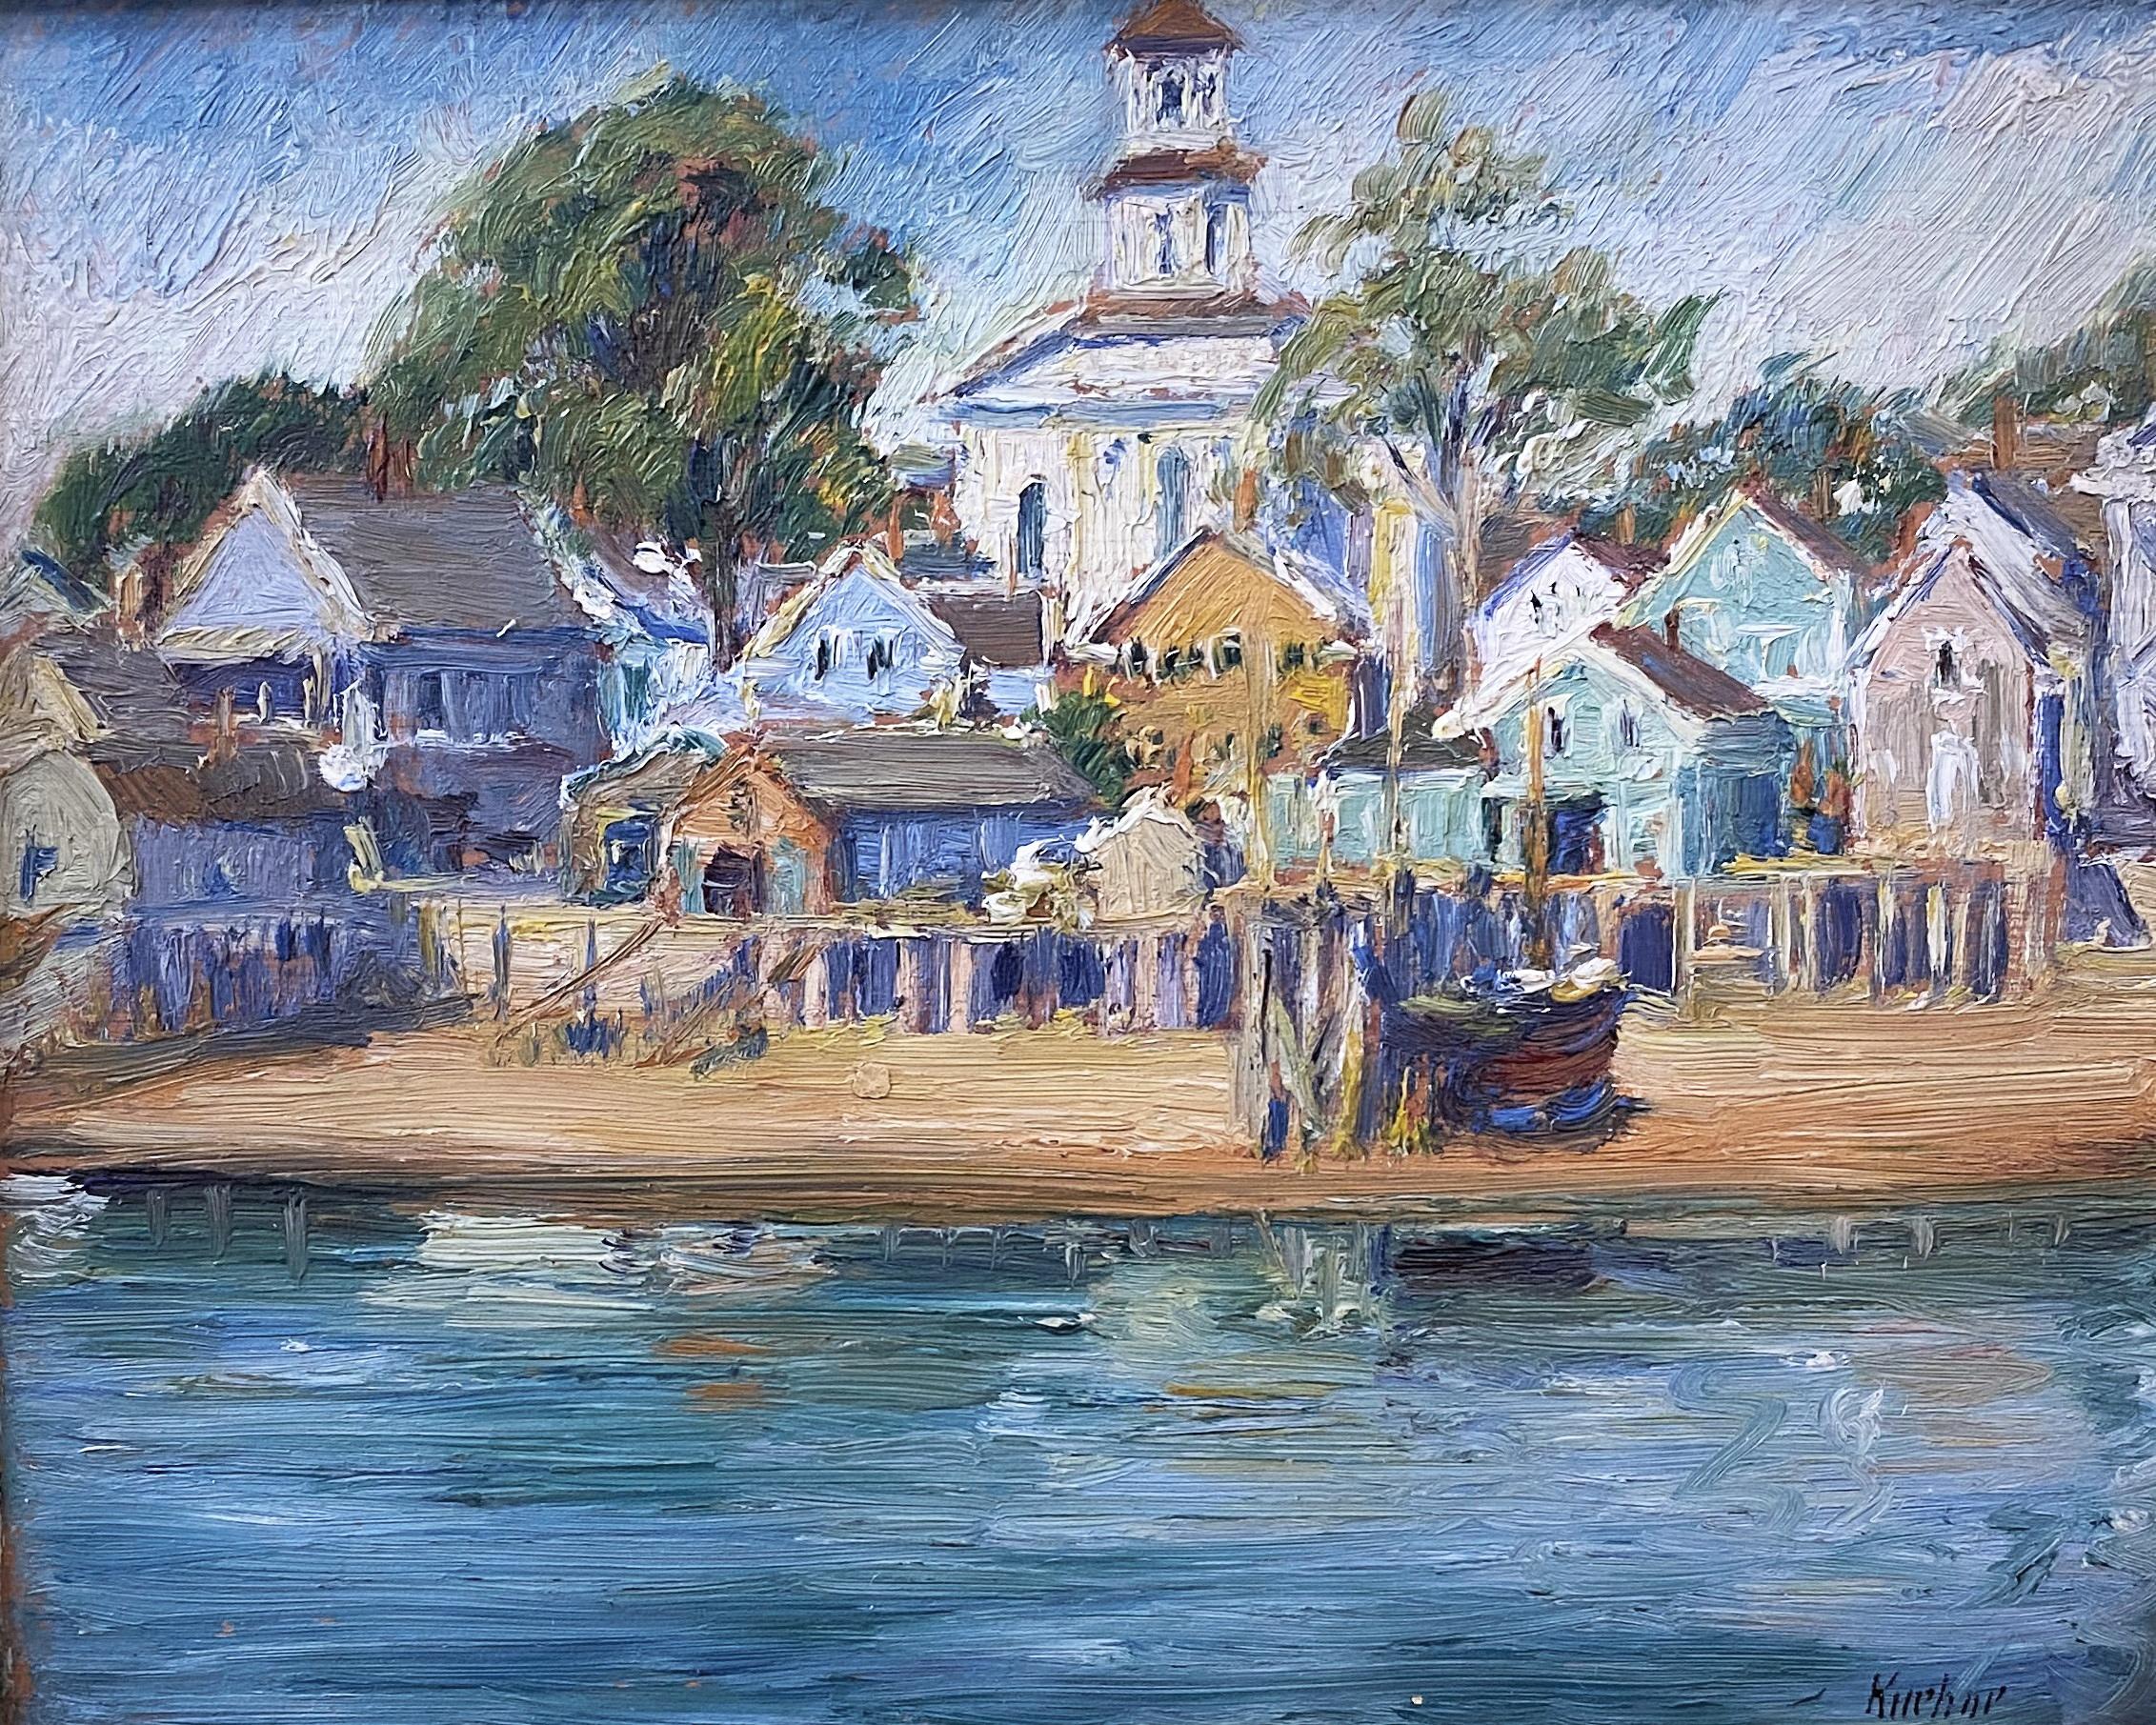 Provincetown - Painting by Max Kuehne